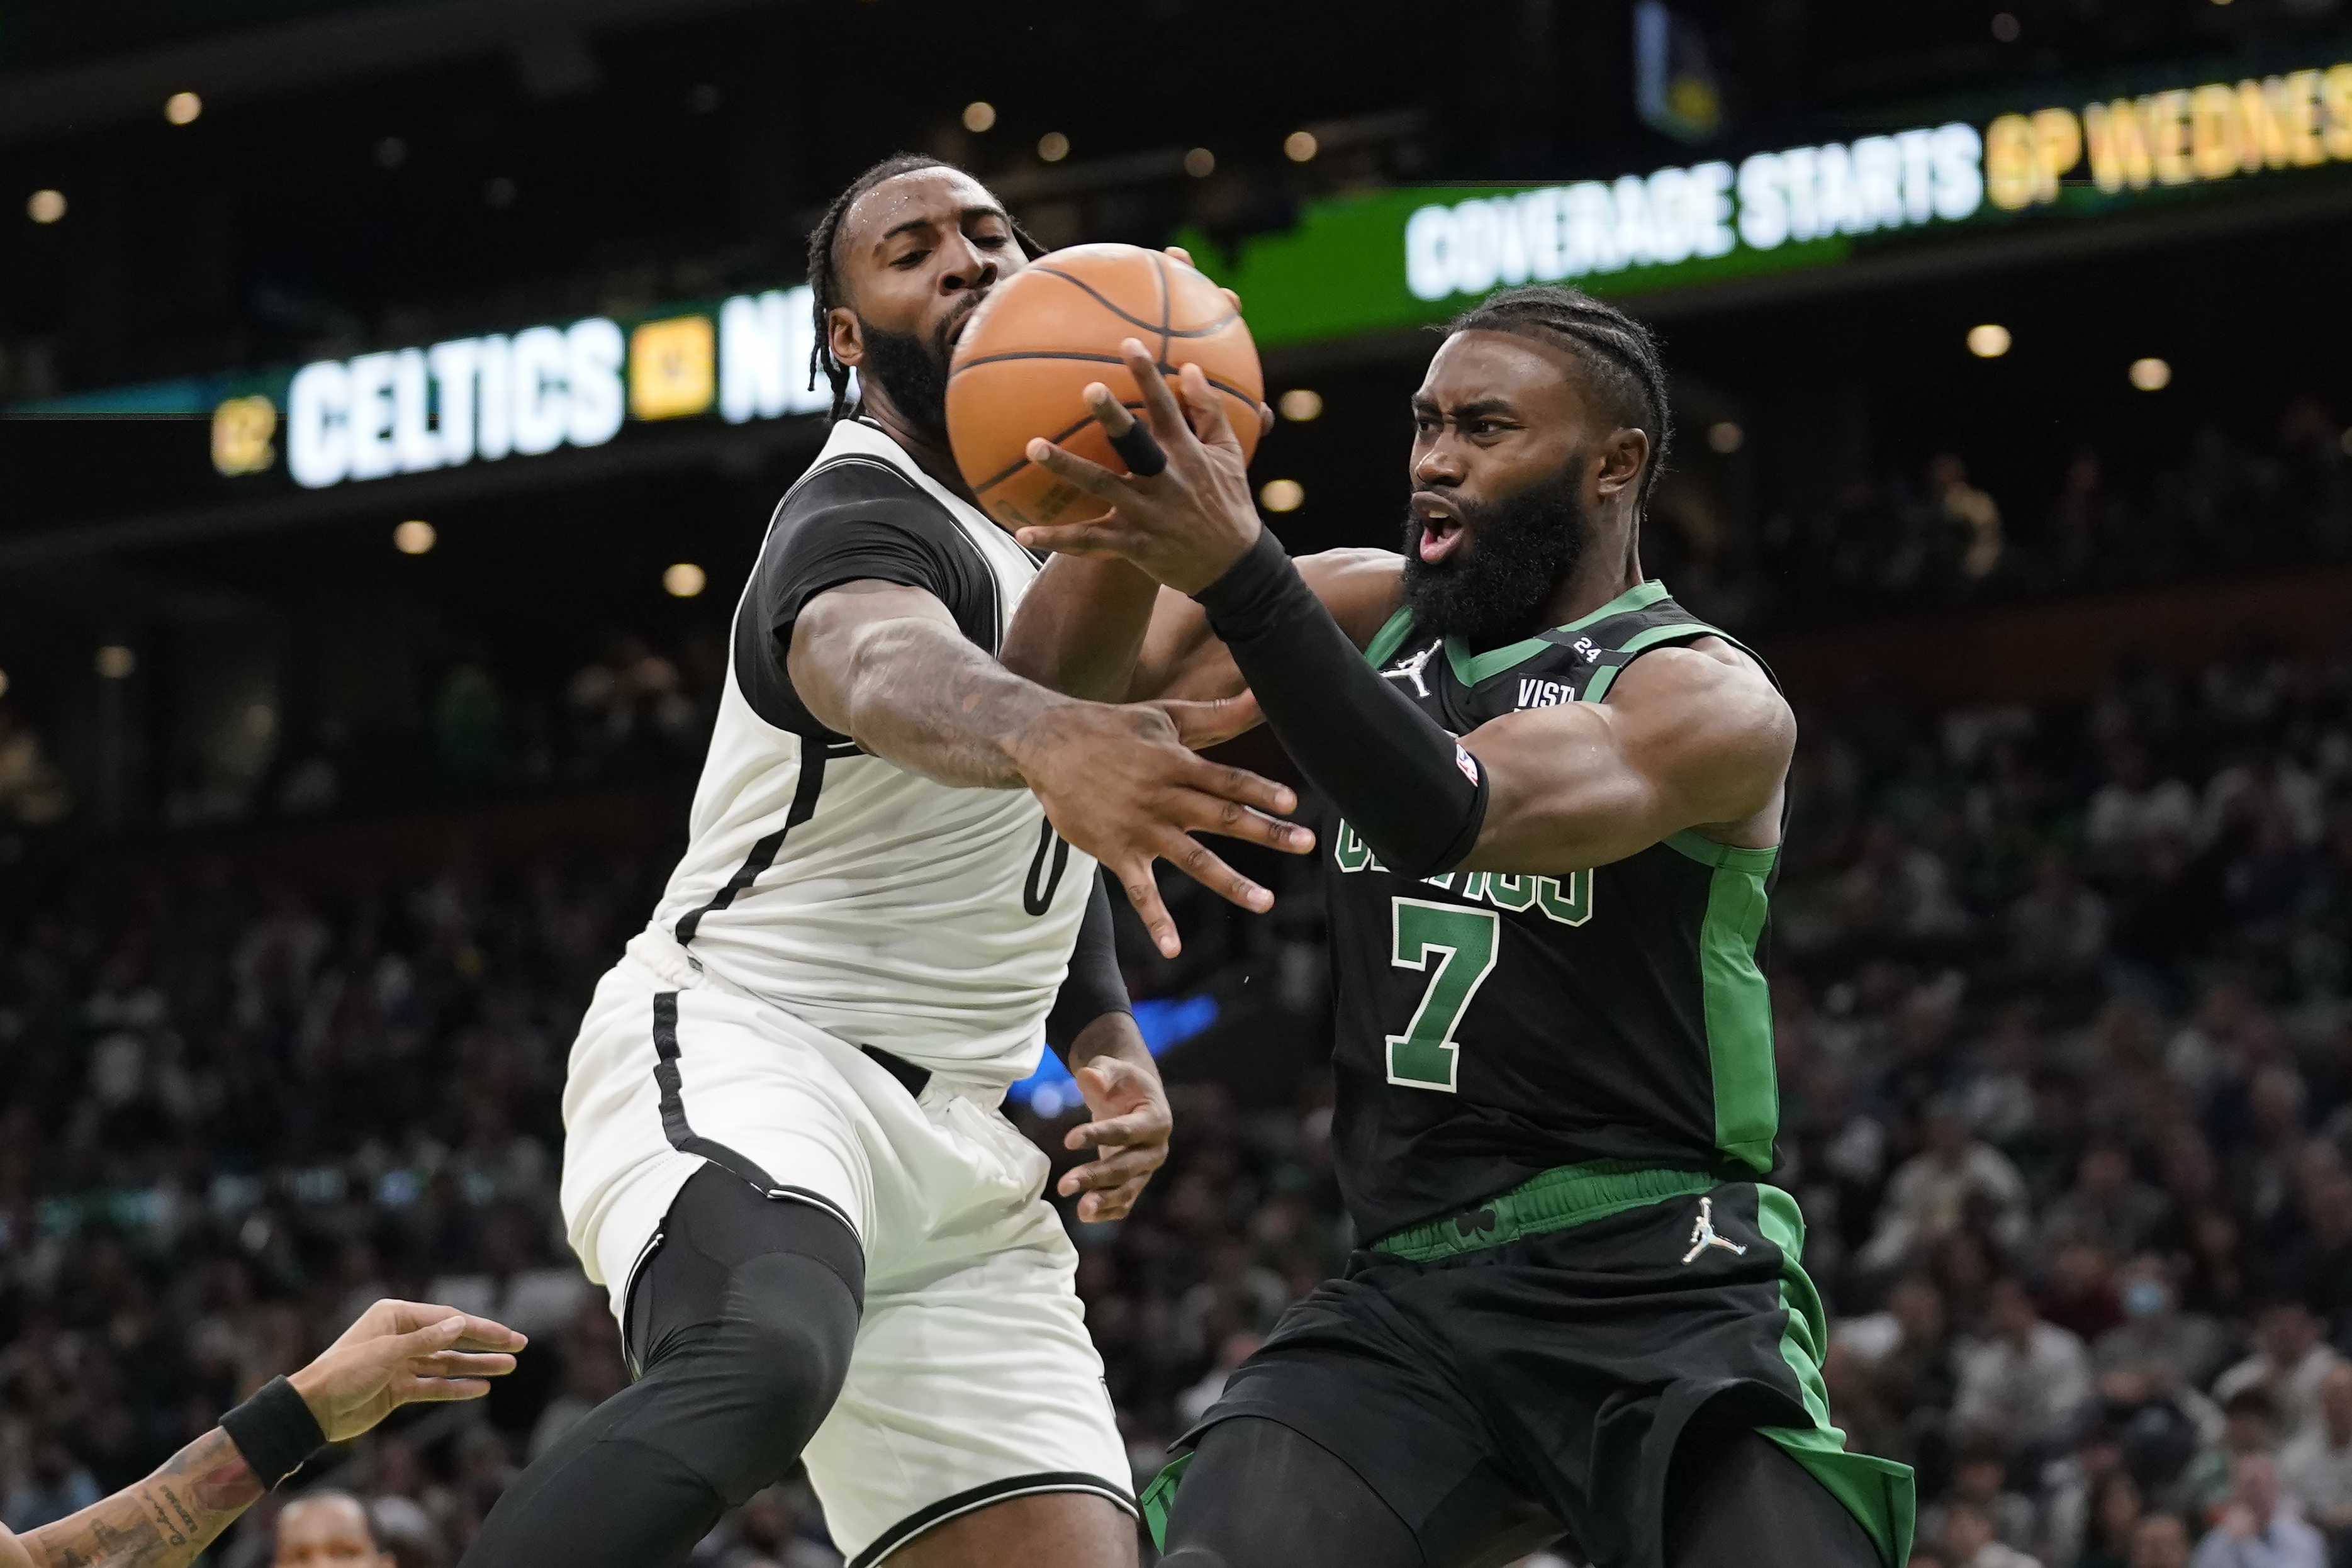 Boston Celtics at Brooklyn Nets free live stream (4/23/22) How to watch Game 3 of NBA playoff series, channel, time